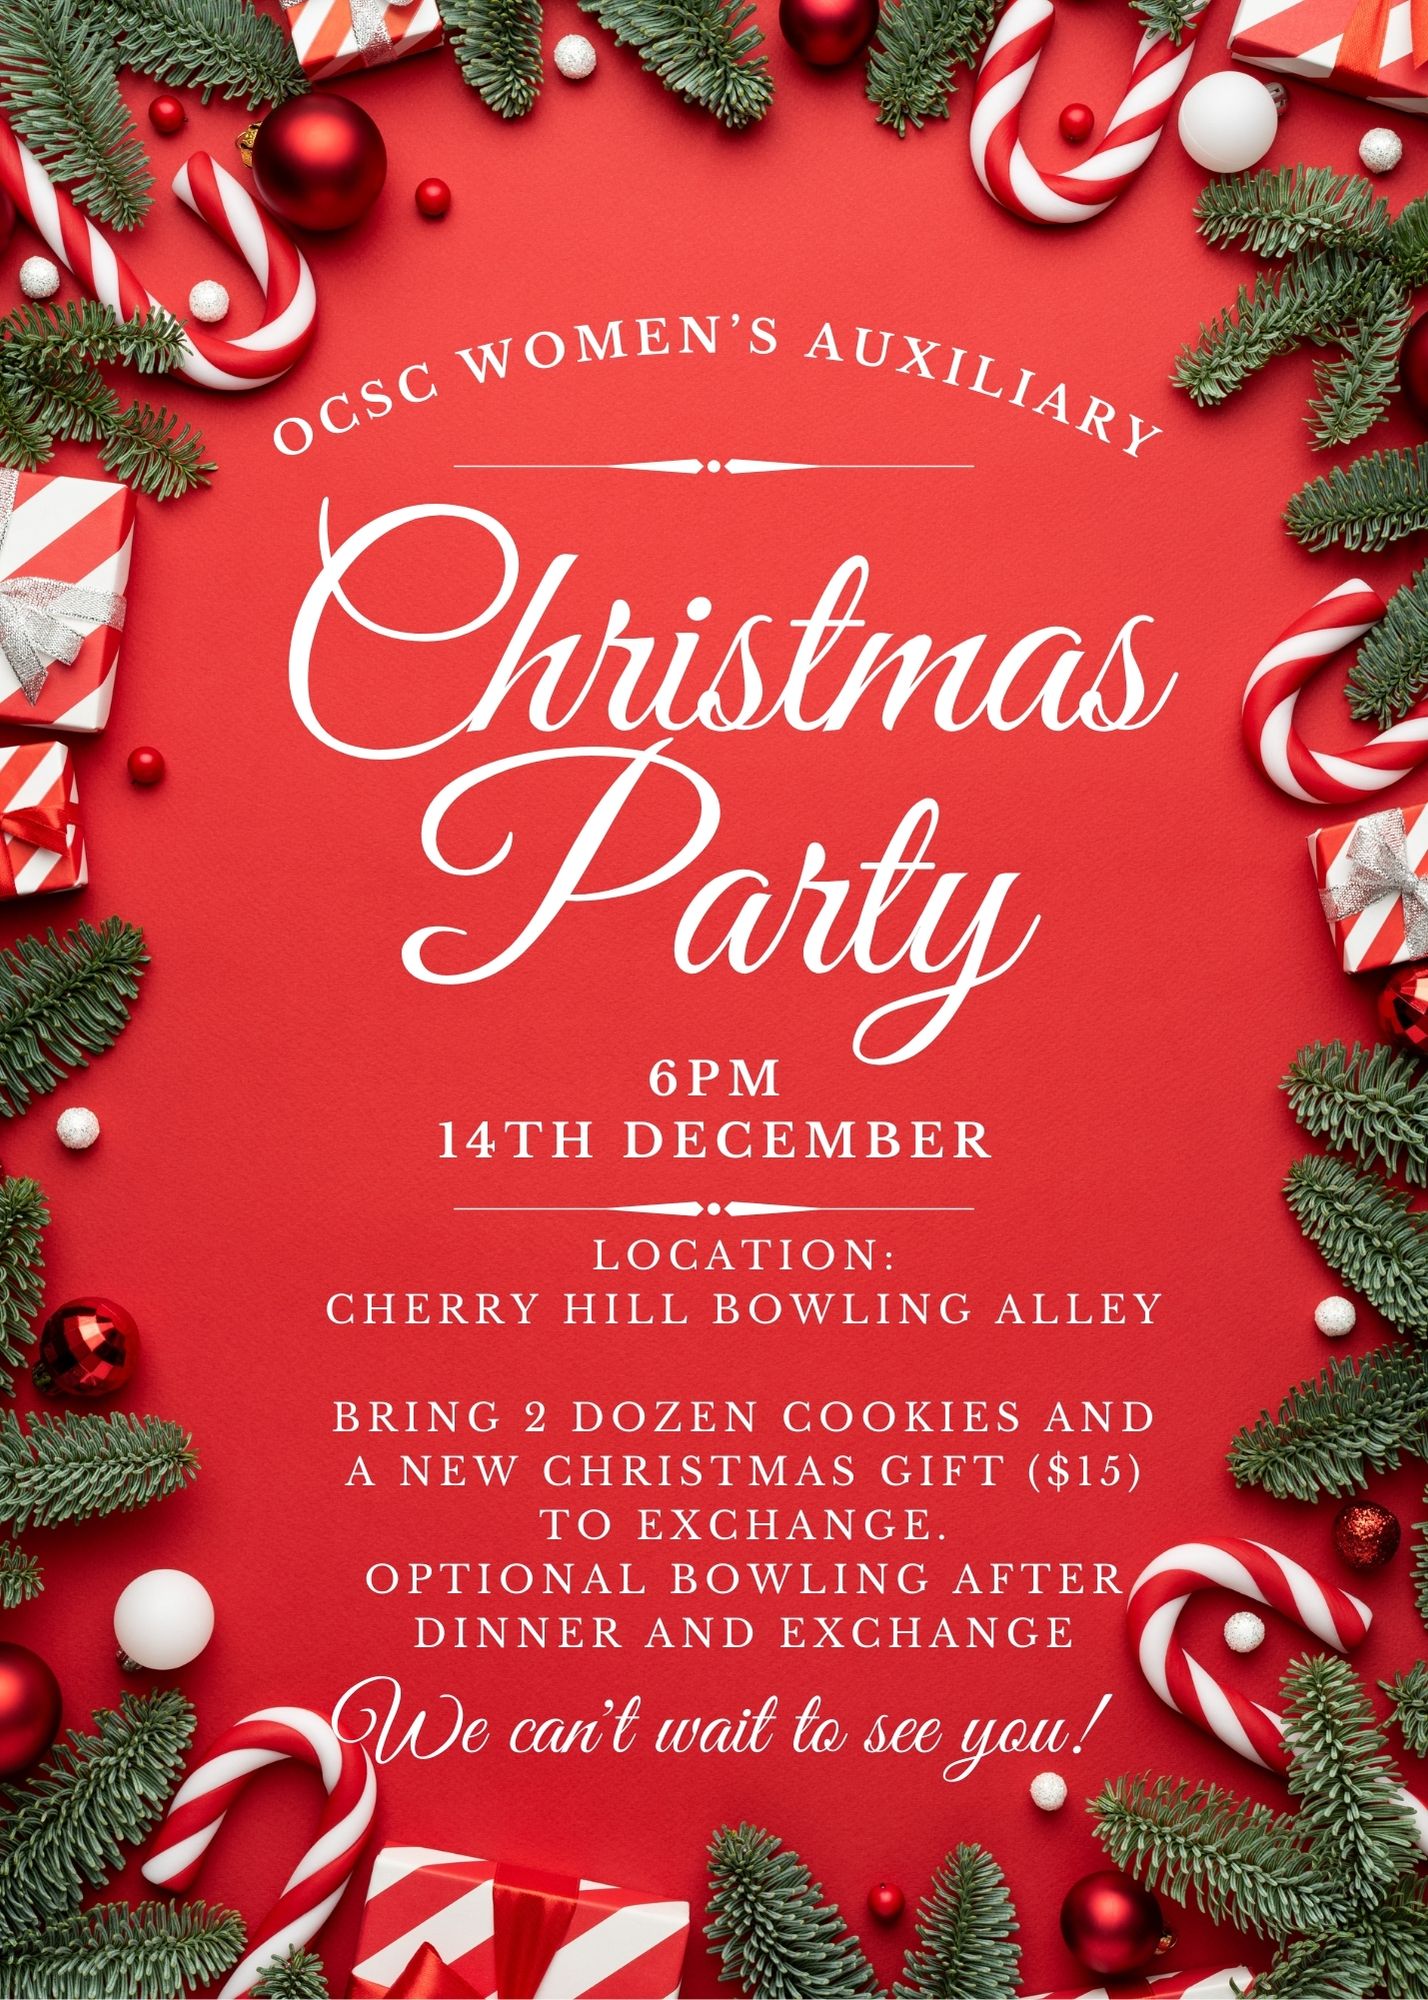 Women's Auxiliary Christmas Party